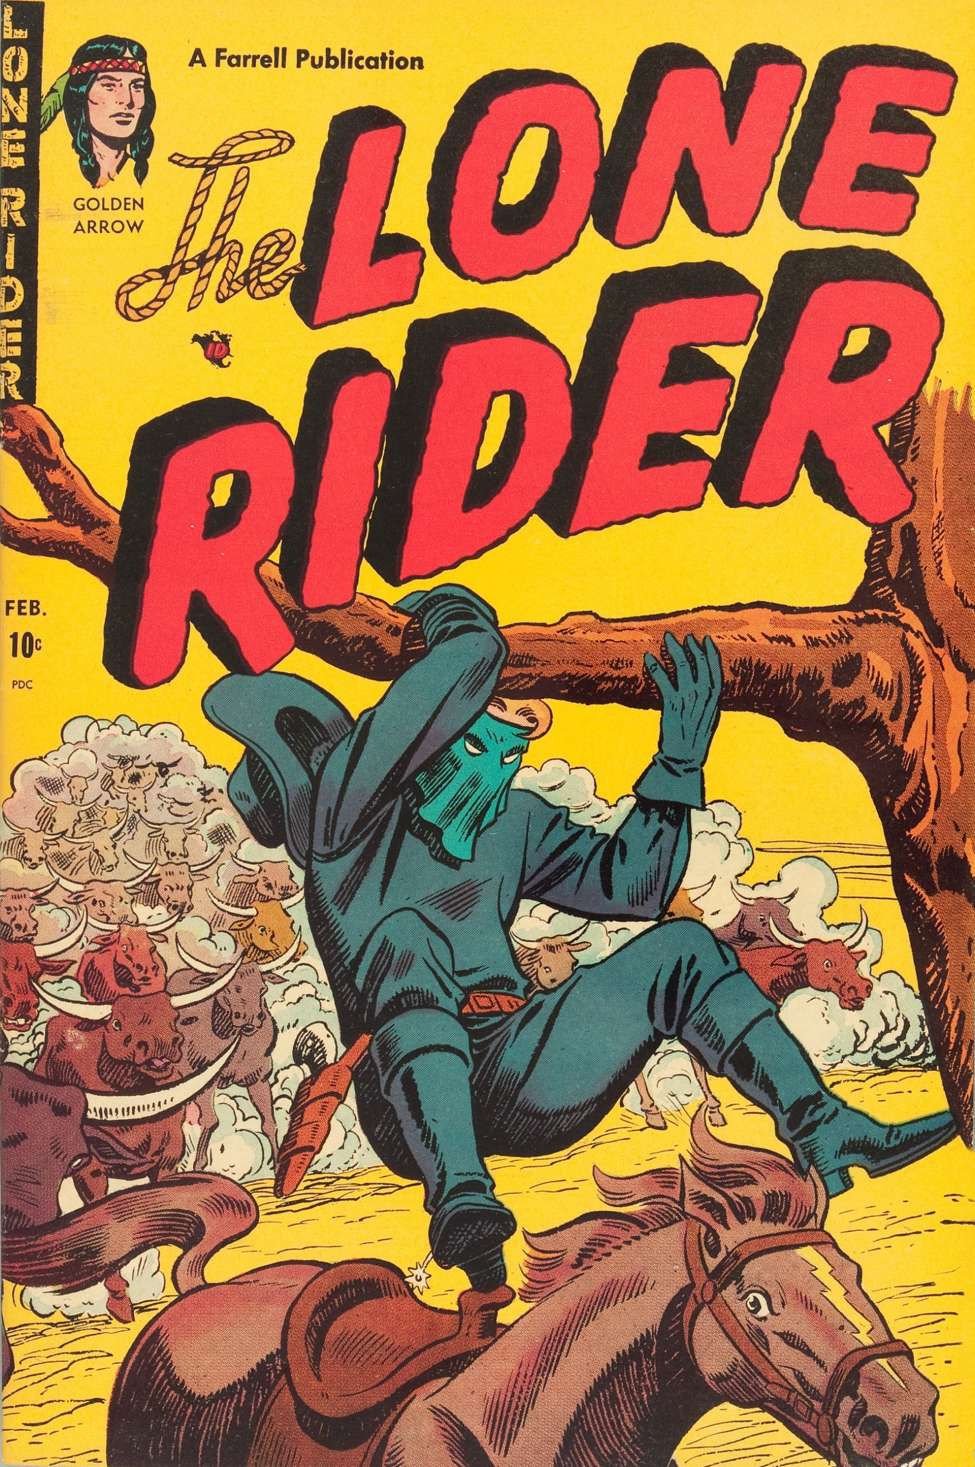 Book Cover For The Lone Rider 6 - Version 1